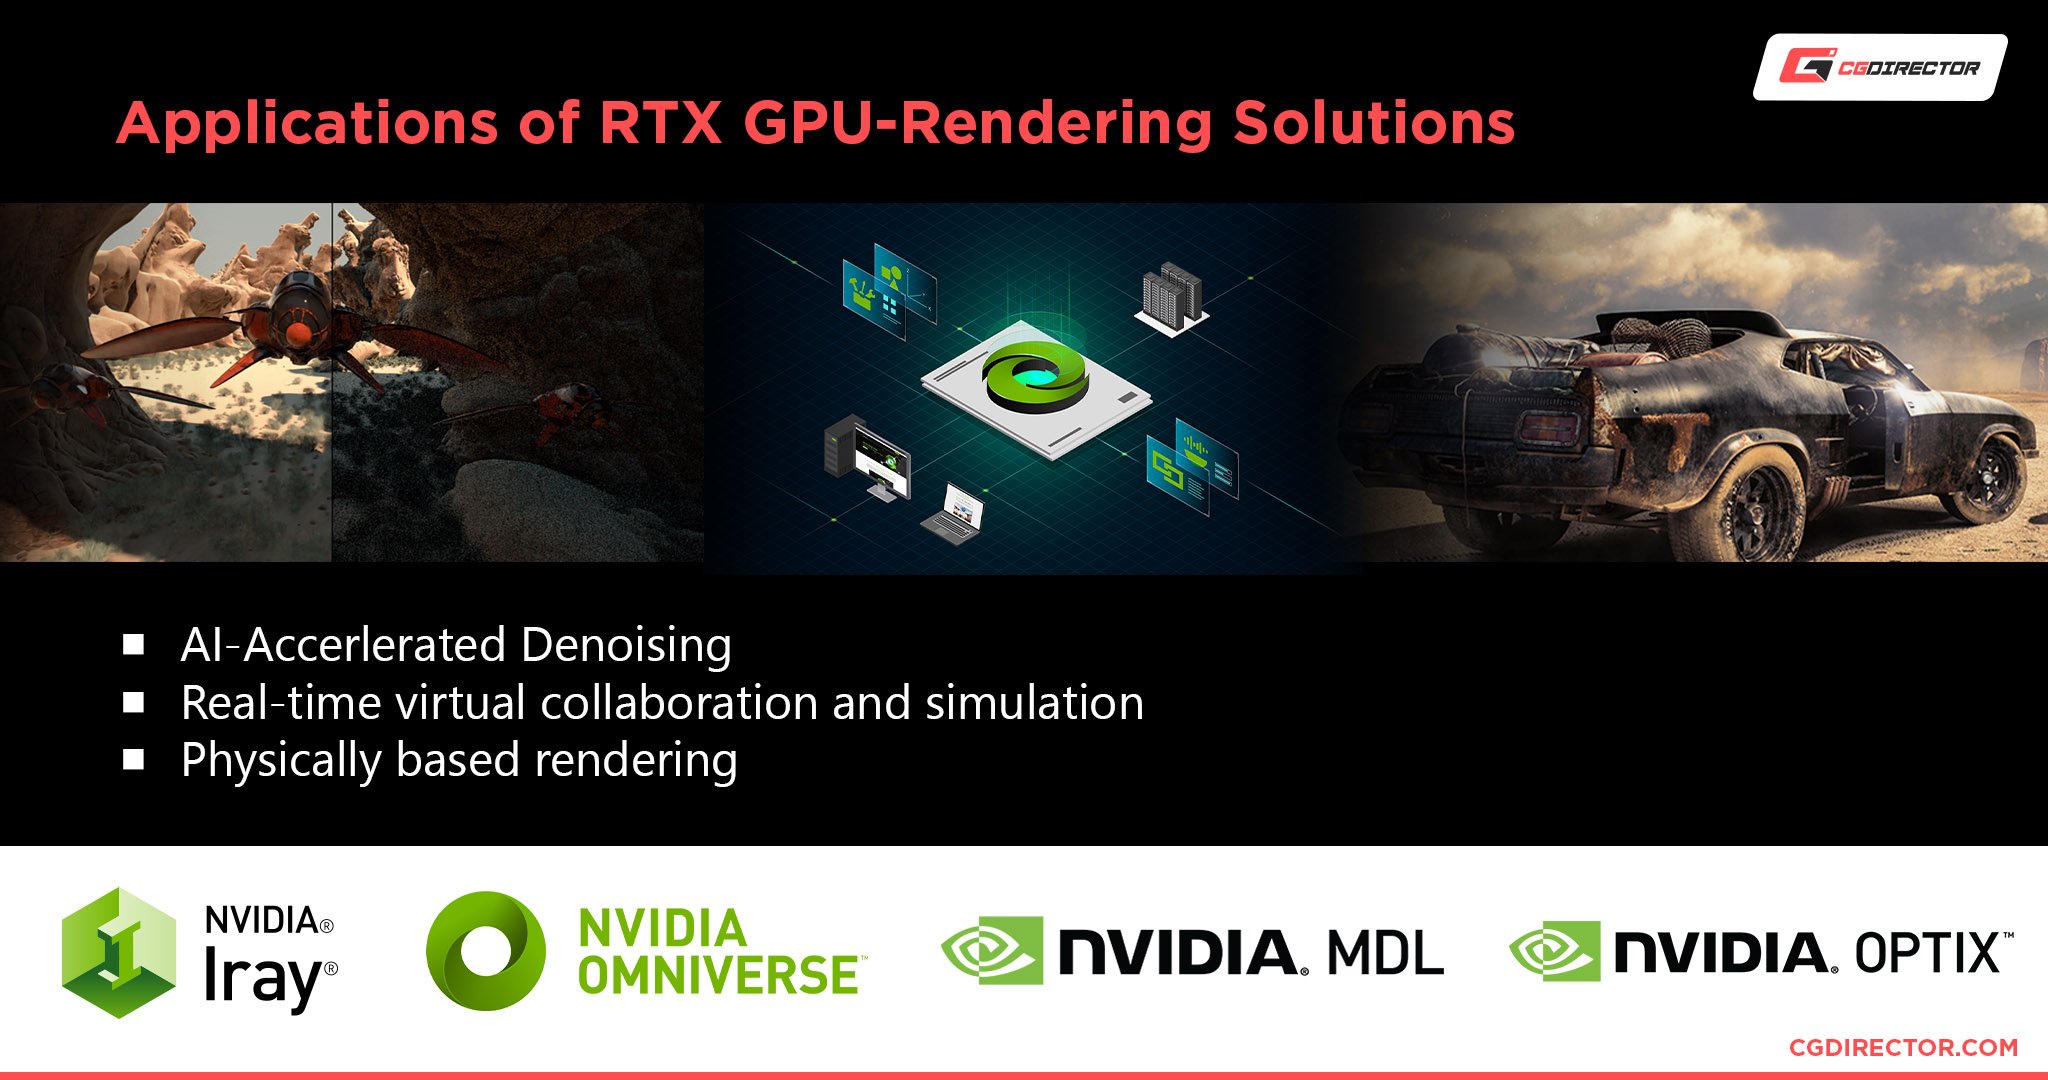 Nvidia-Developed RTX GPU-Rendering Solutions